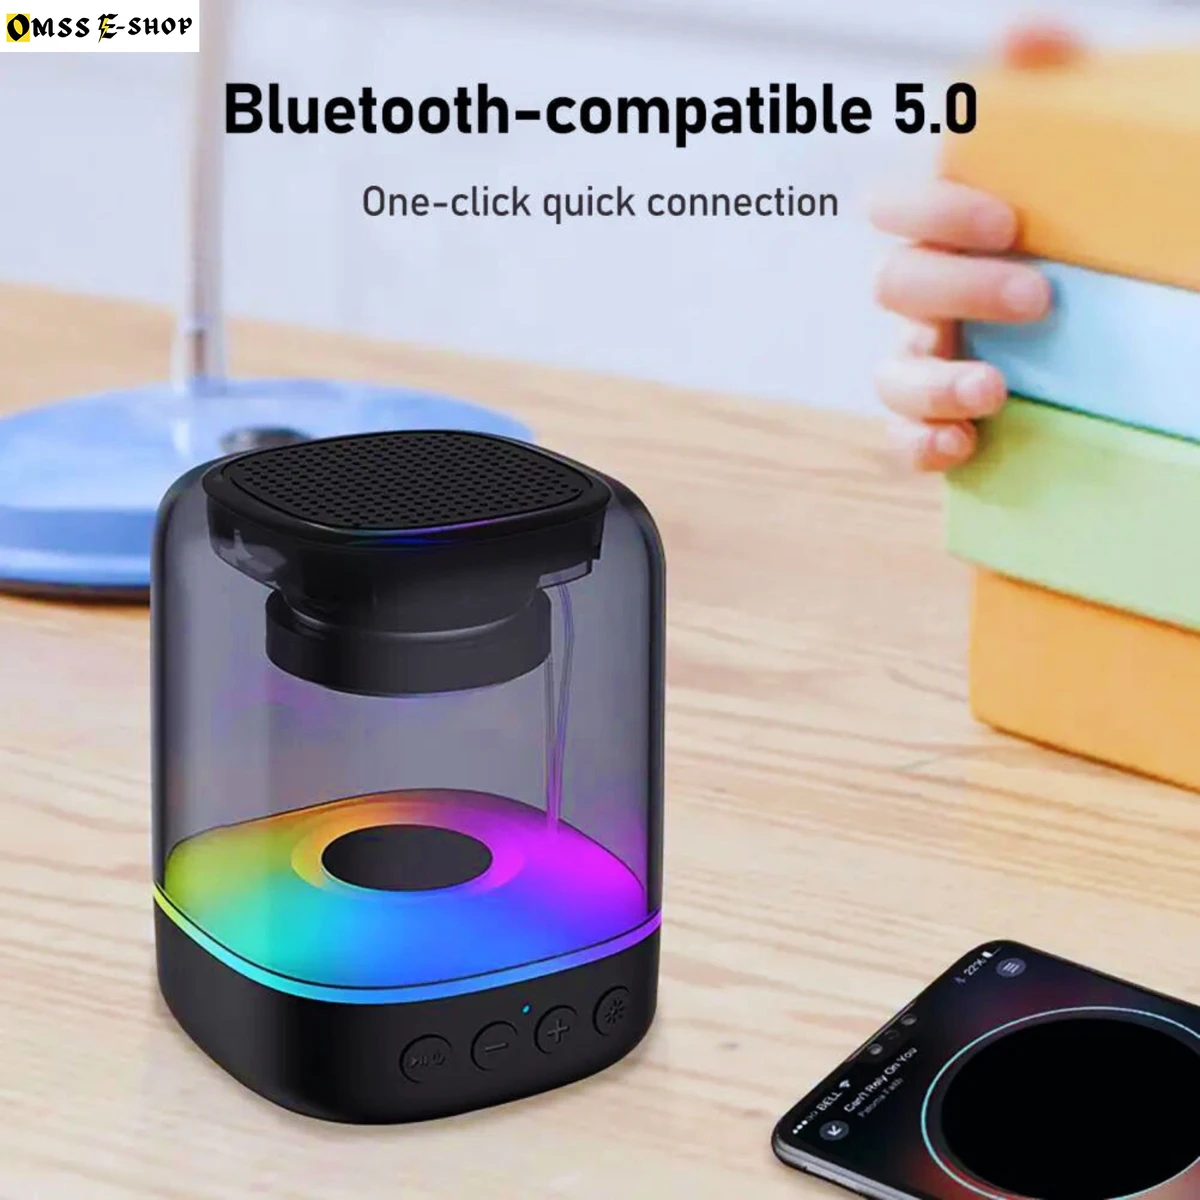 E-3052 Bluetooth Speaker Surround Sound Portable Outdoor HiFi Stereo Mini Wireless Subwoofer for Mobile Phone With RGB LED Lamp